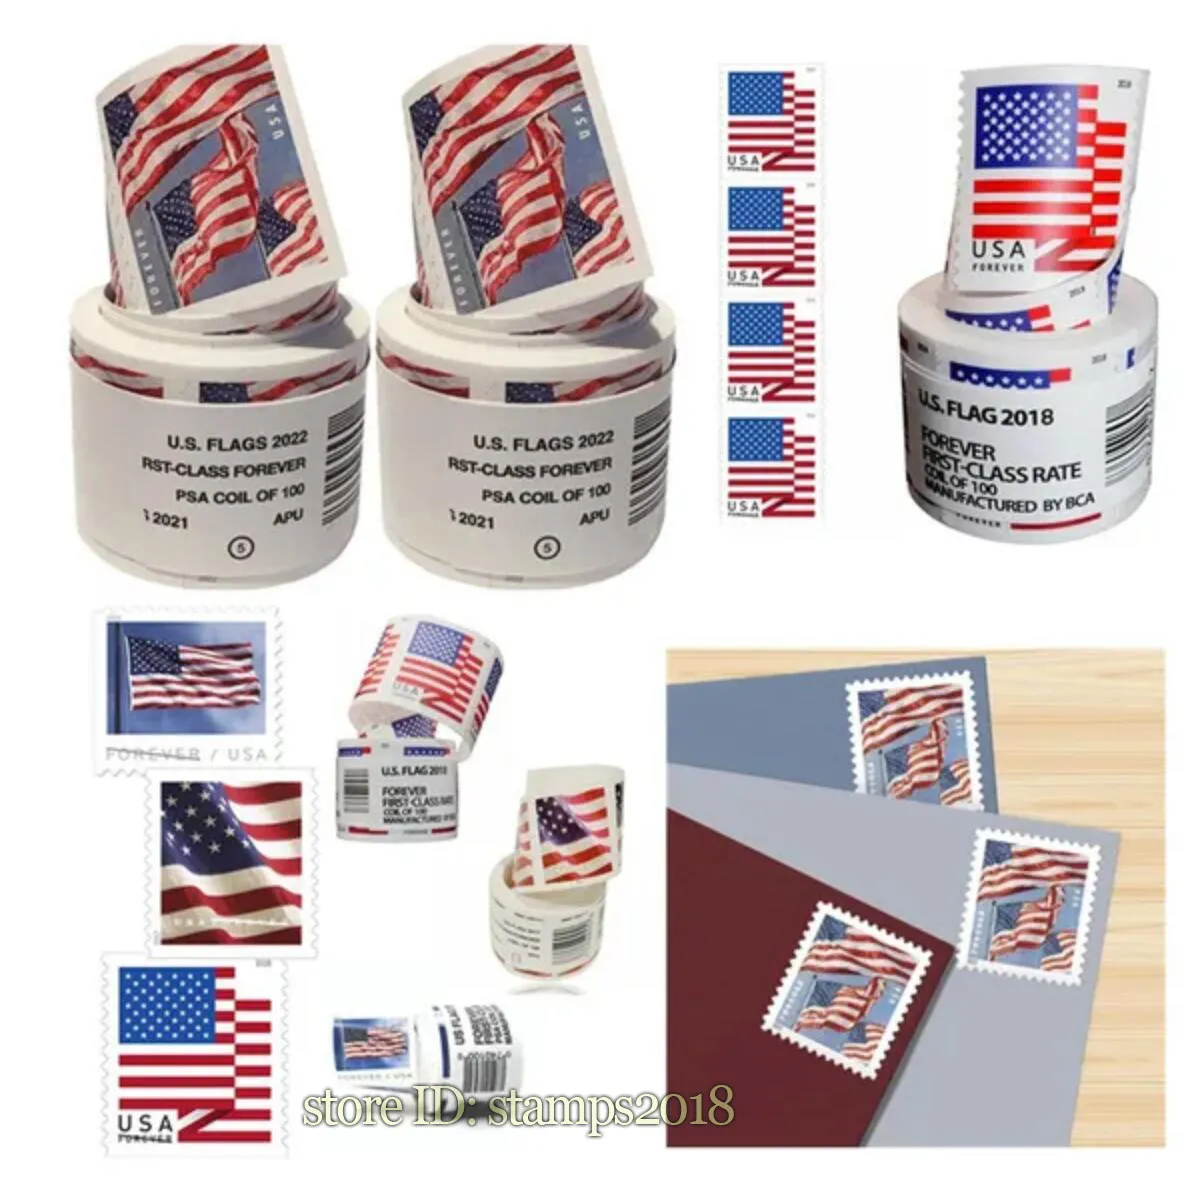 Forever New 2020 U.S. para envelopes Letters Post -Card Office Cards Supplies Collection